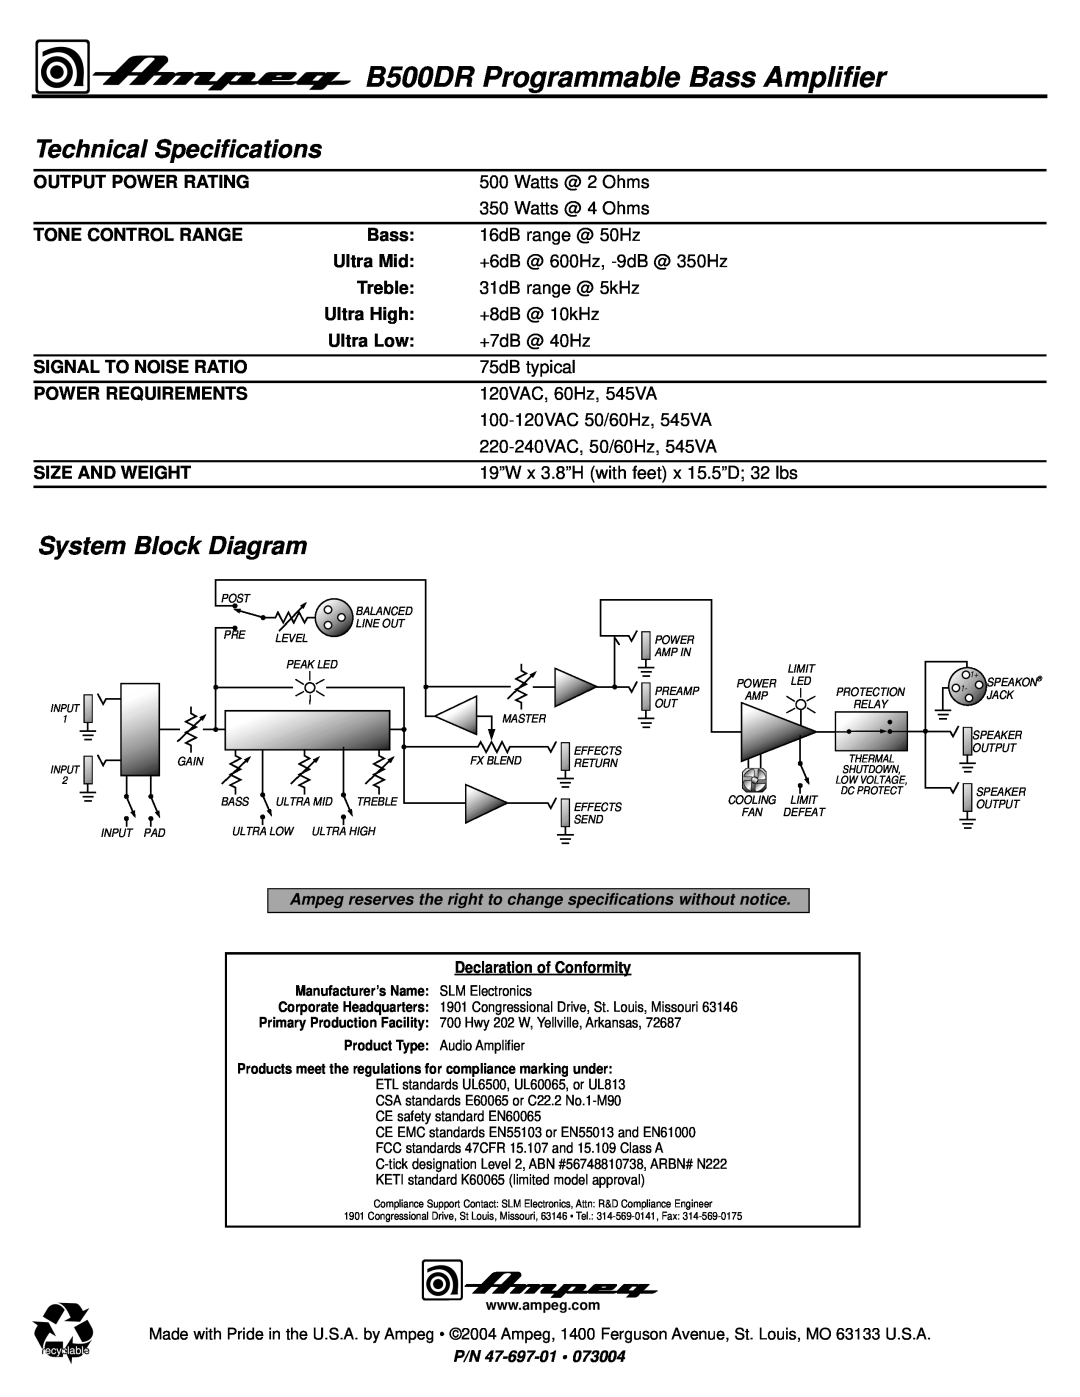 Ampeg manual Technical Specifications, System Block Diagram, B500DR Programmable Bass Amplifier 